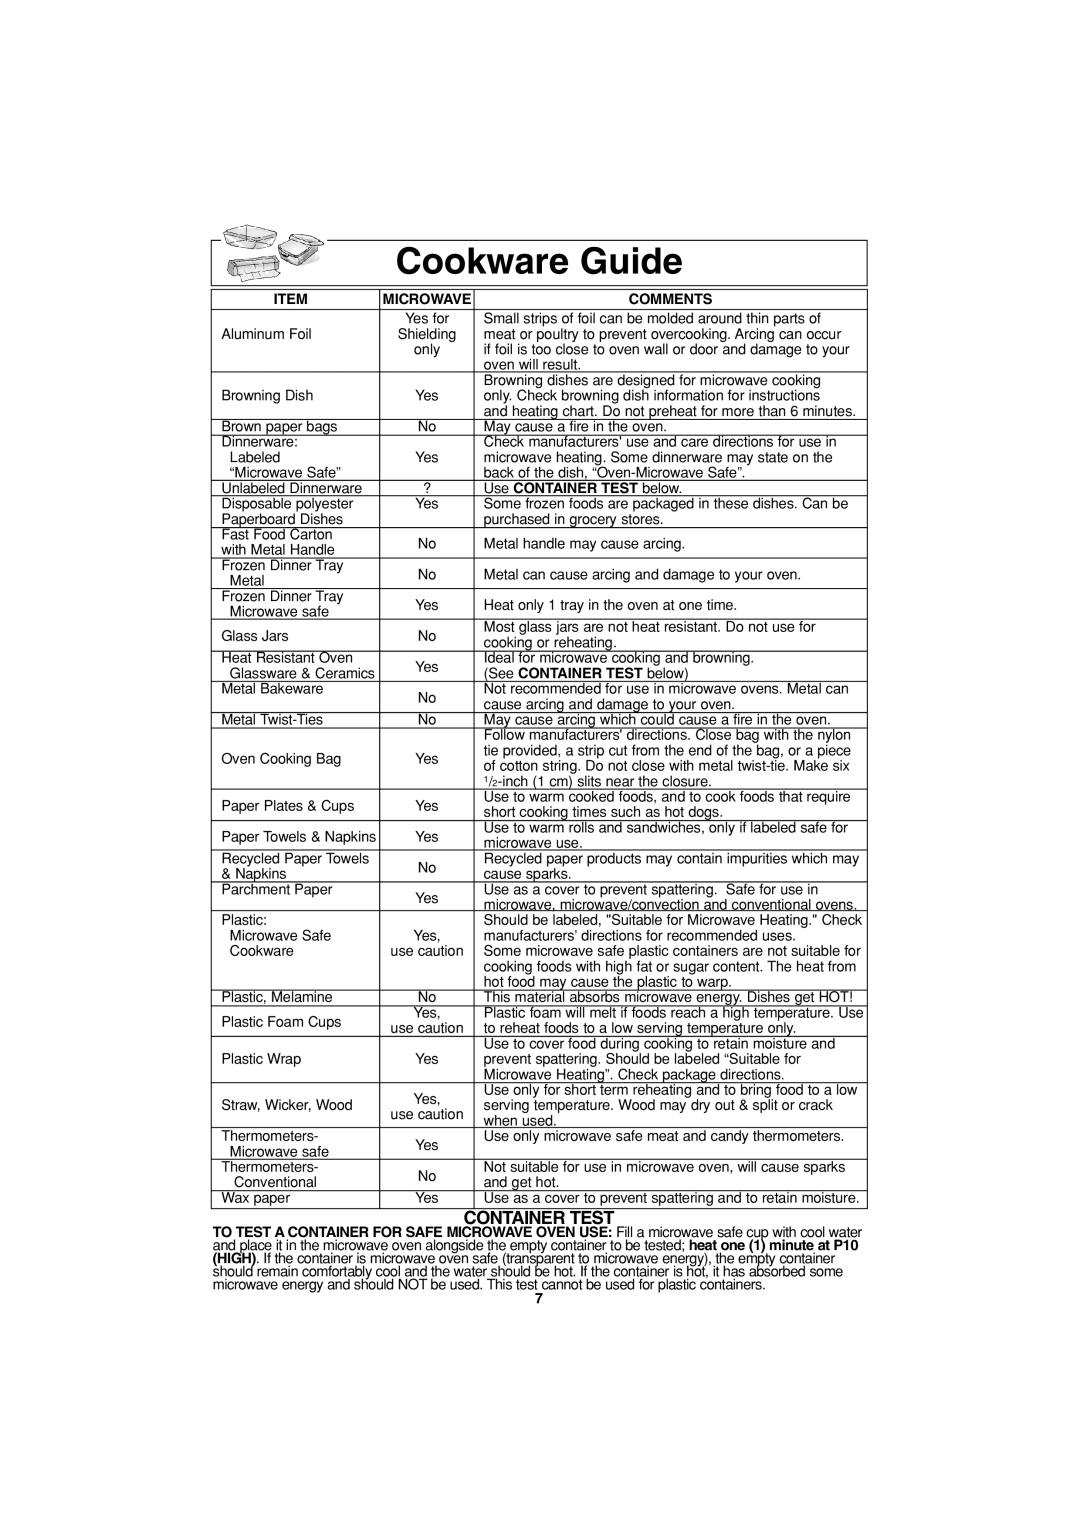 Panasonic NN-S443 Cookware Guide, Container Test, Comments, Use CONTAINER TEST below, See CONTAINER TEST below 